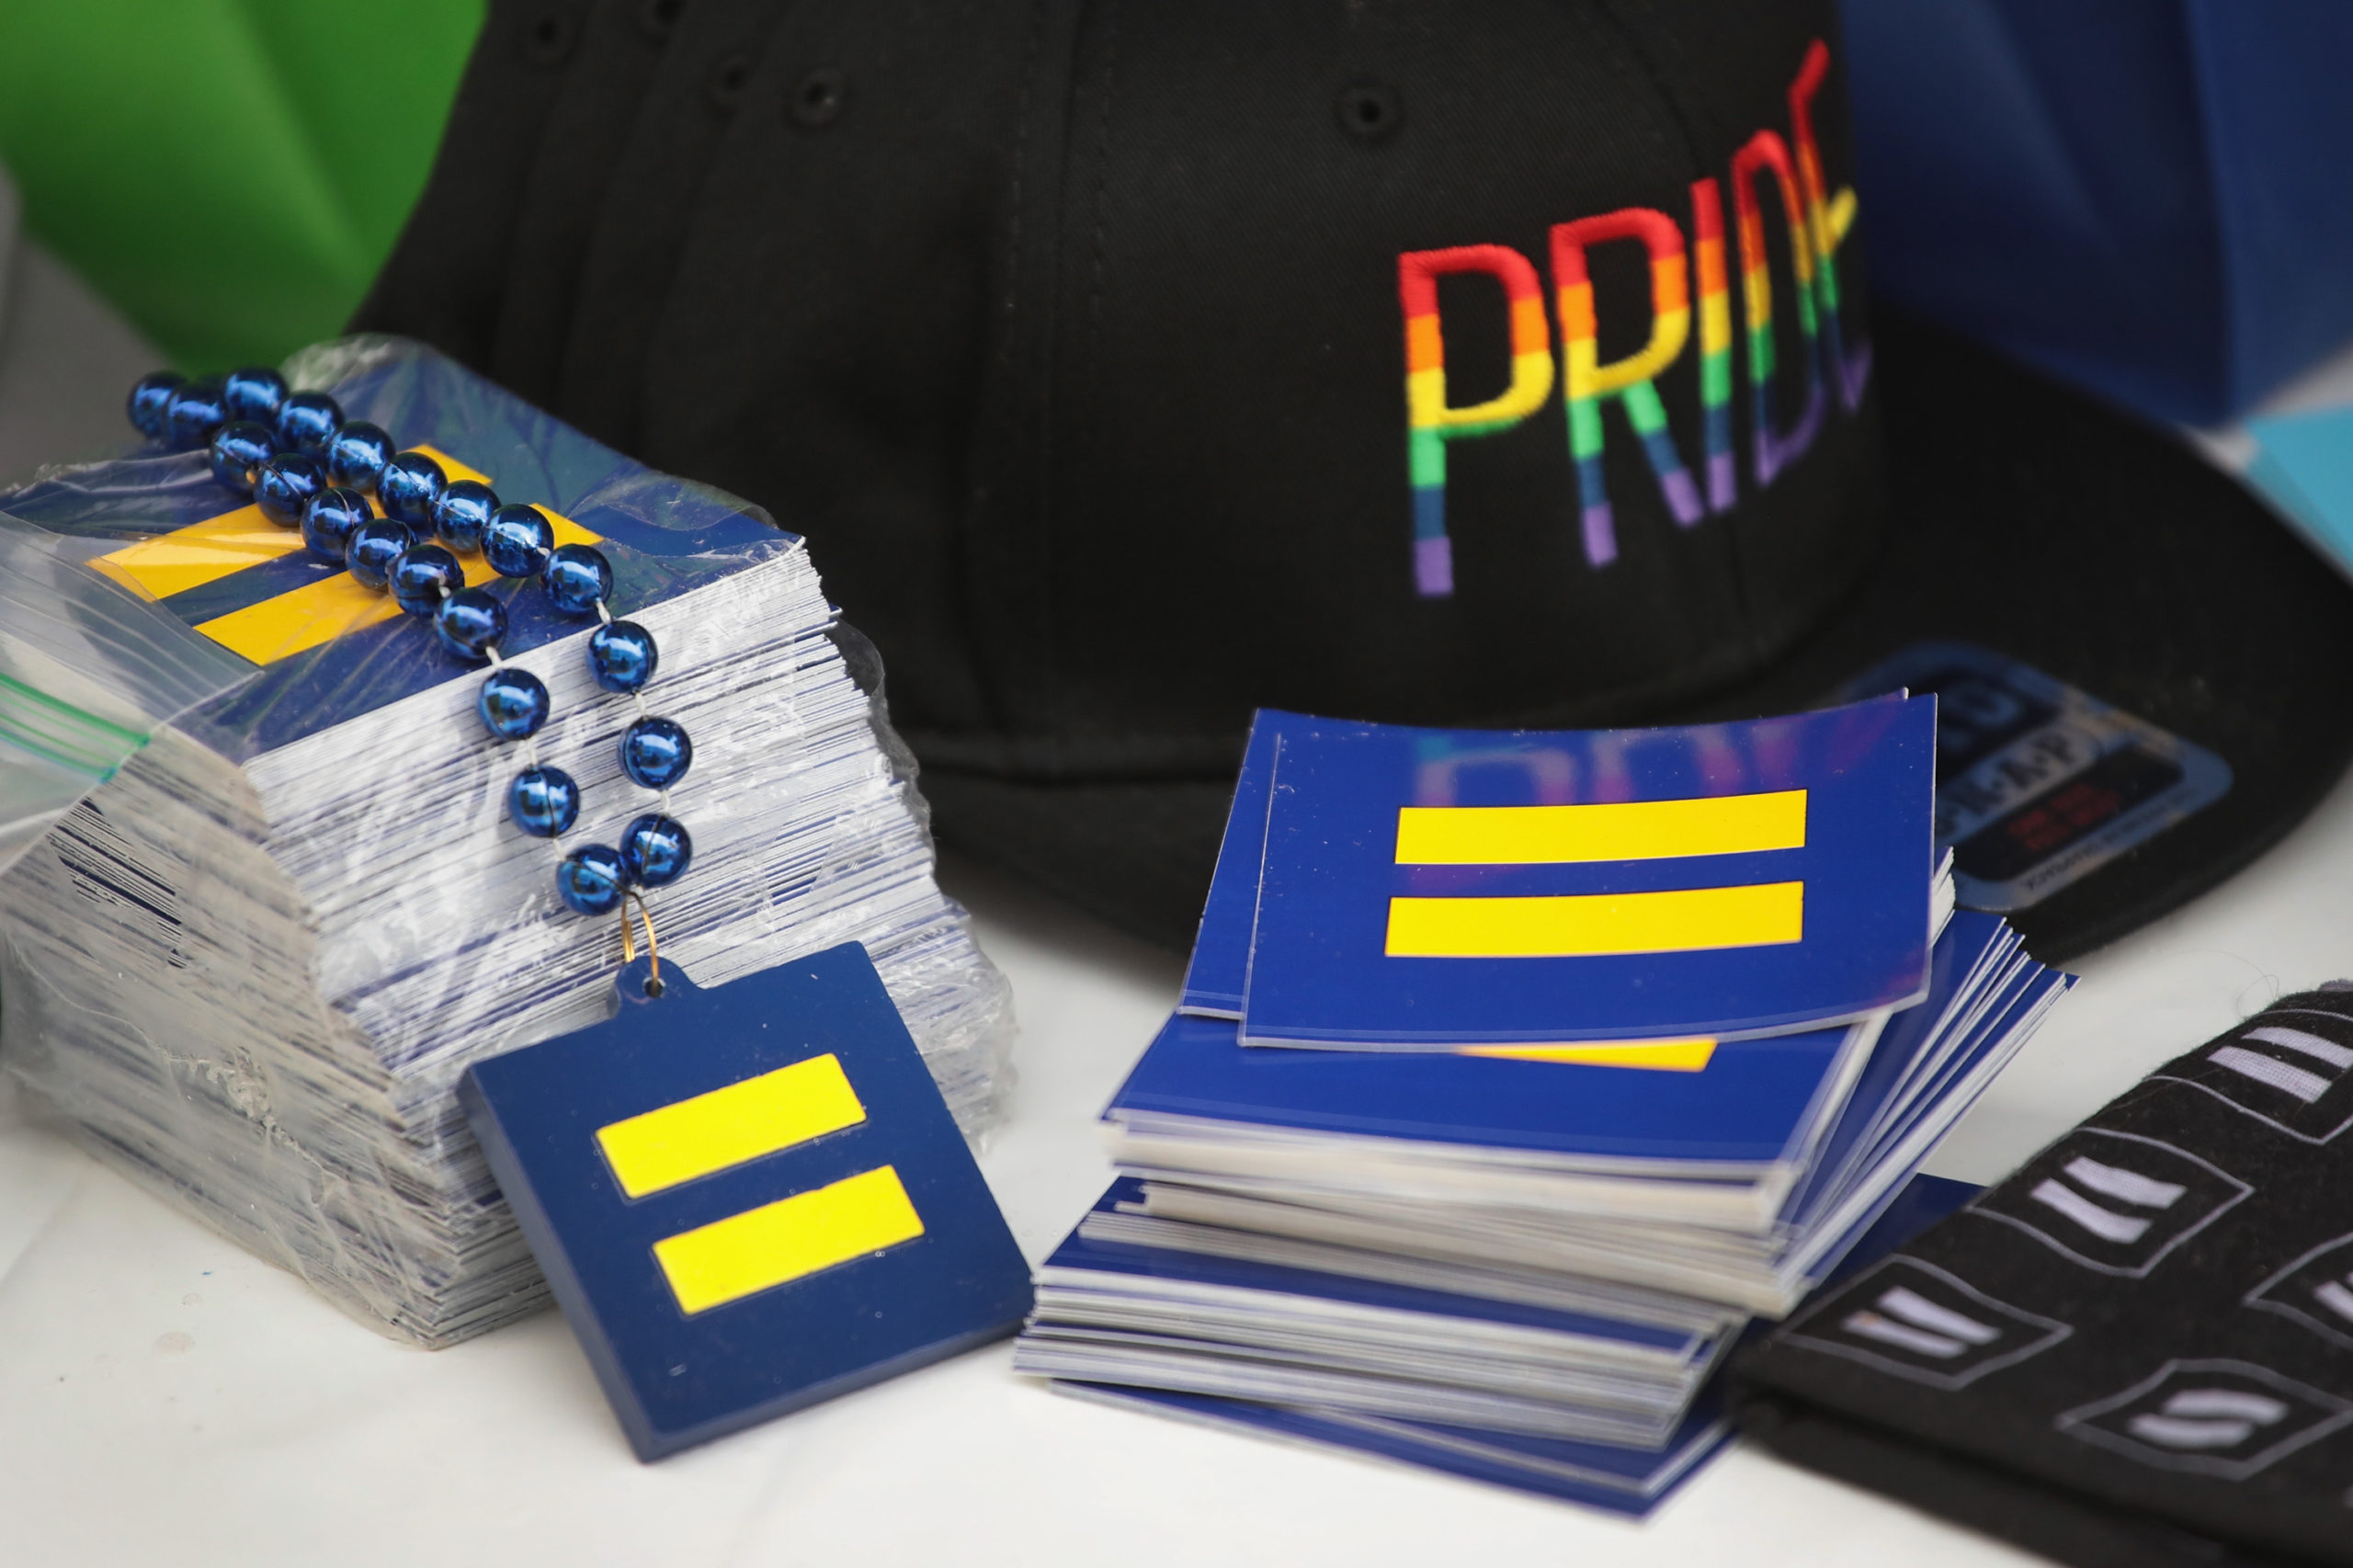 Merchandise if offered for sale at the Columbus Pride Festival on April 14, 2018 in Columbus, Indiana. The festival was the first LGBT pride event for the community which is the hometown of Vice President Mike Pence, a vocal opponent of LGBT issues. The festival, organized by high school senior Erin Bailey, drew hundreds of visitors to the small community located about 45 miles south of Indianapolis. (Photo by Scott Olson/Getty Images)